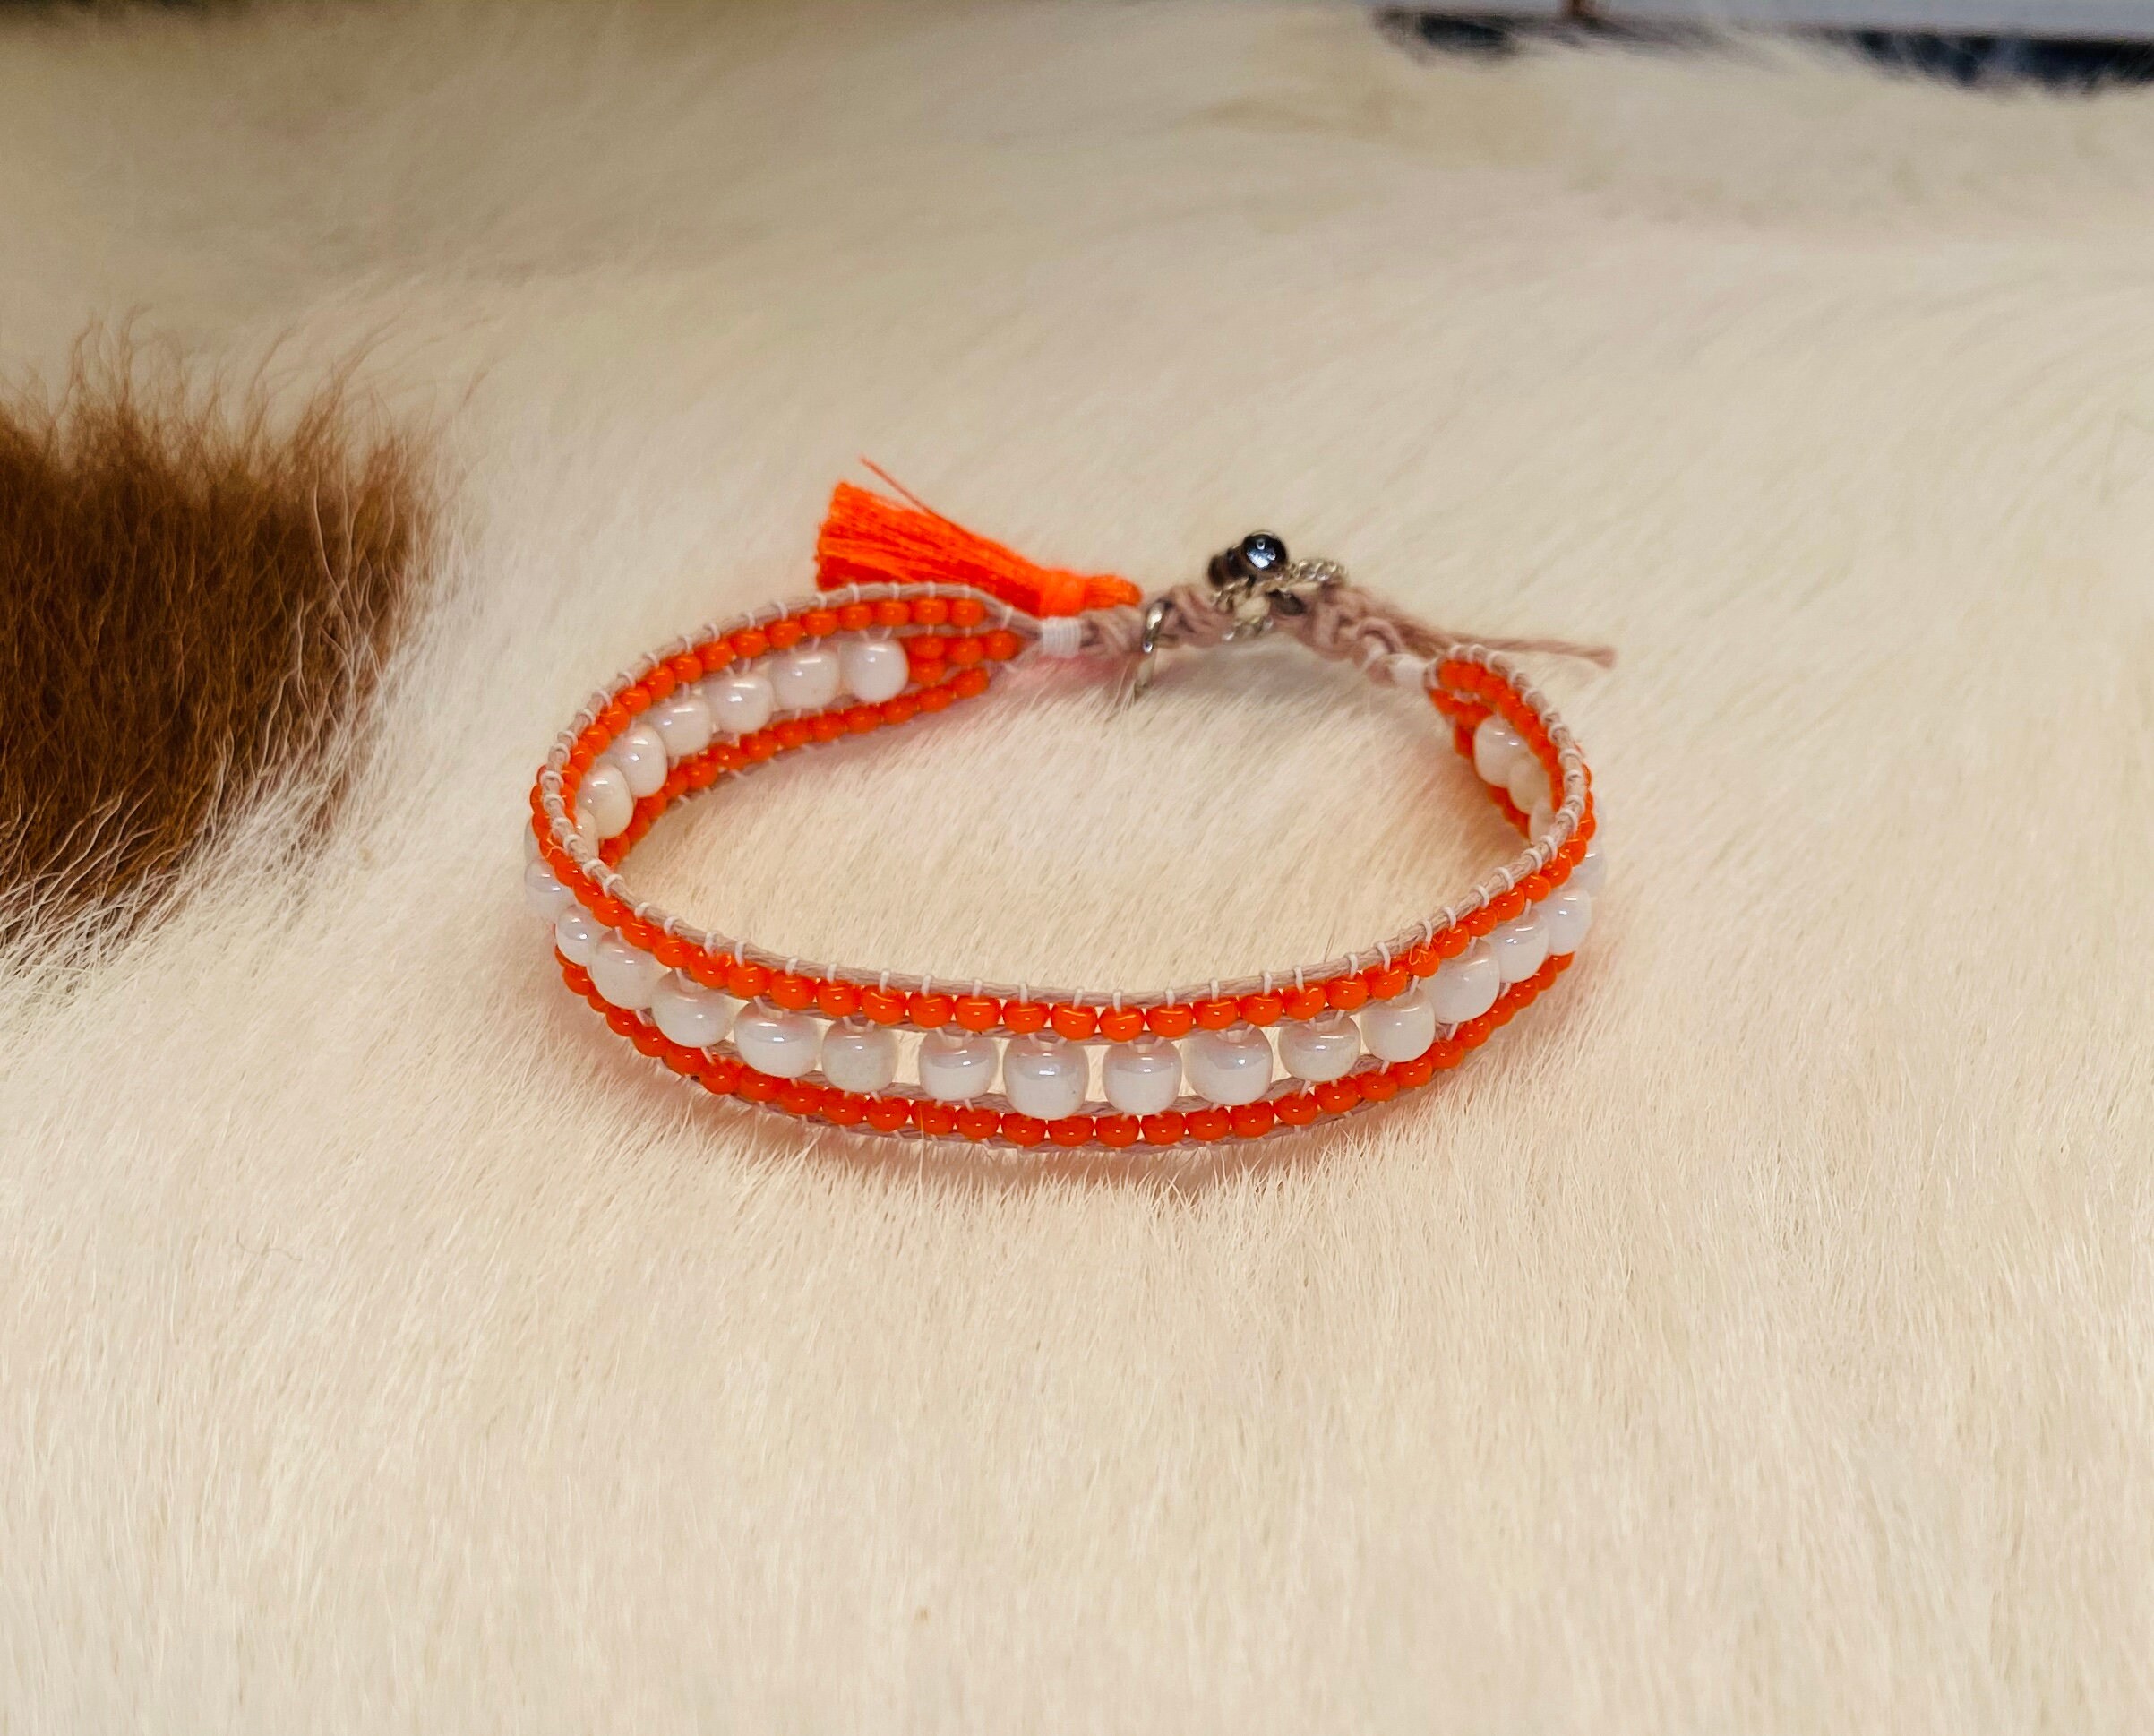 Add this cute bracelet into your collection! Cant get enuf Orange-sicle Love orange